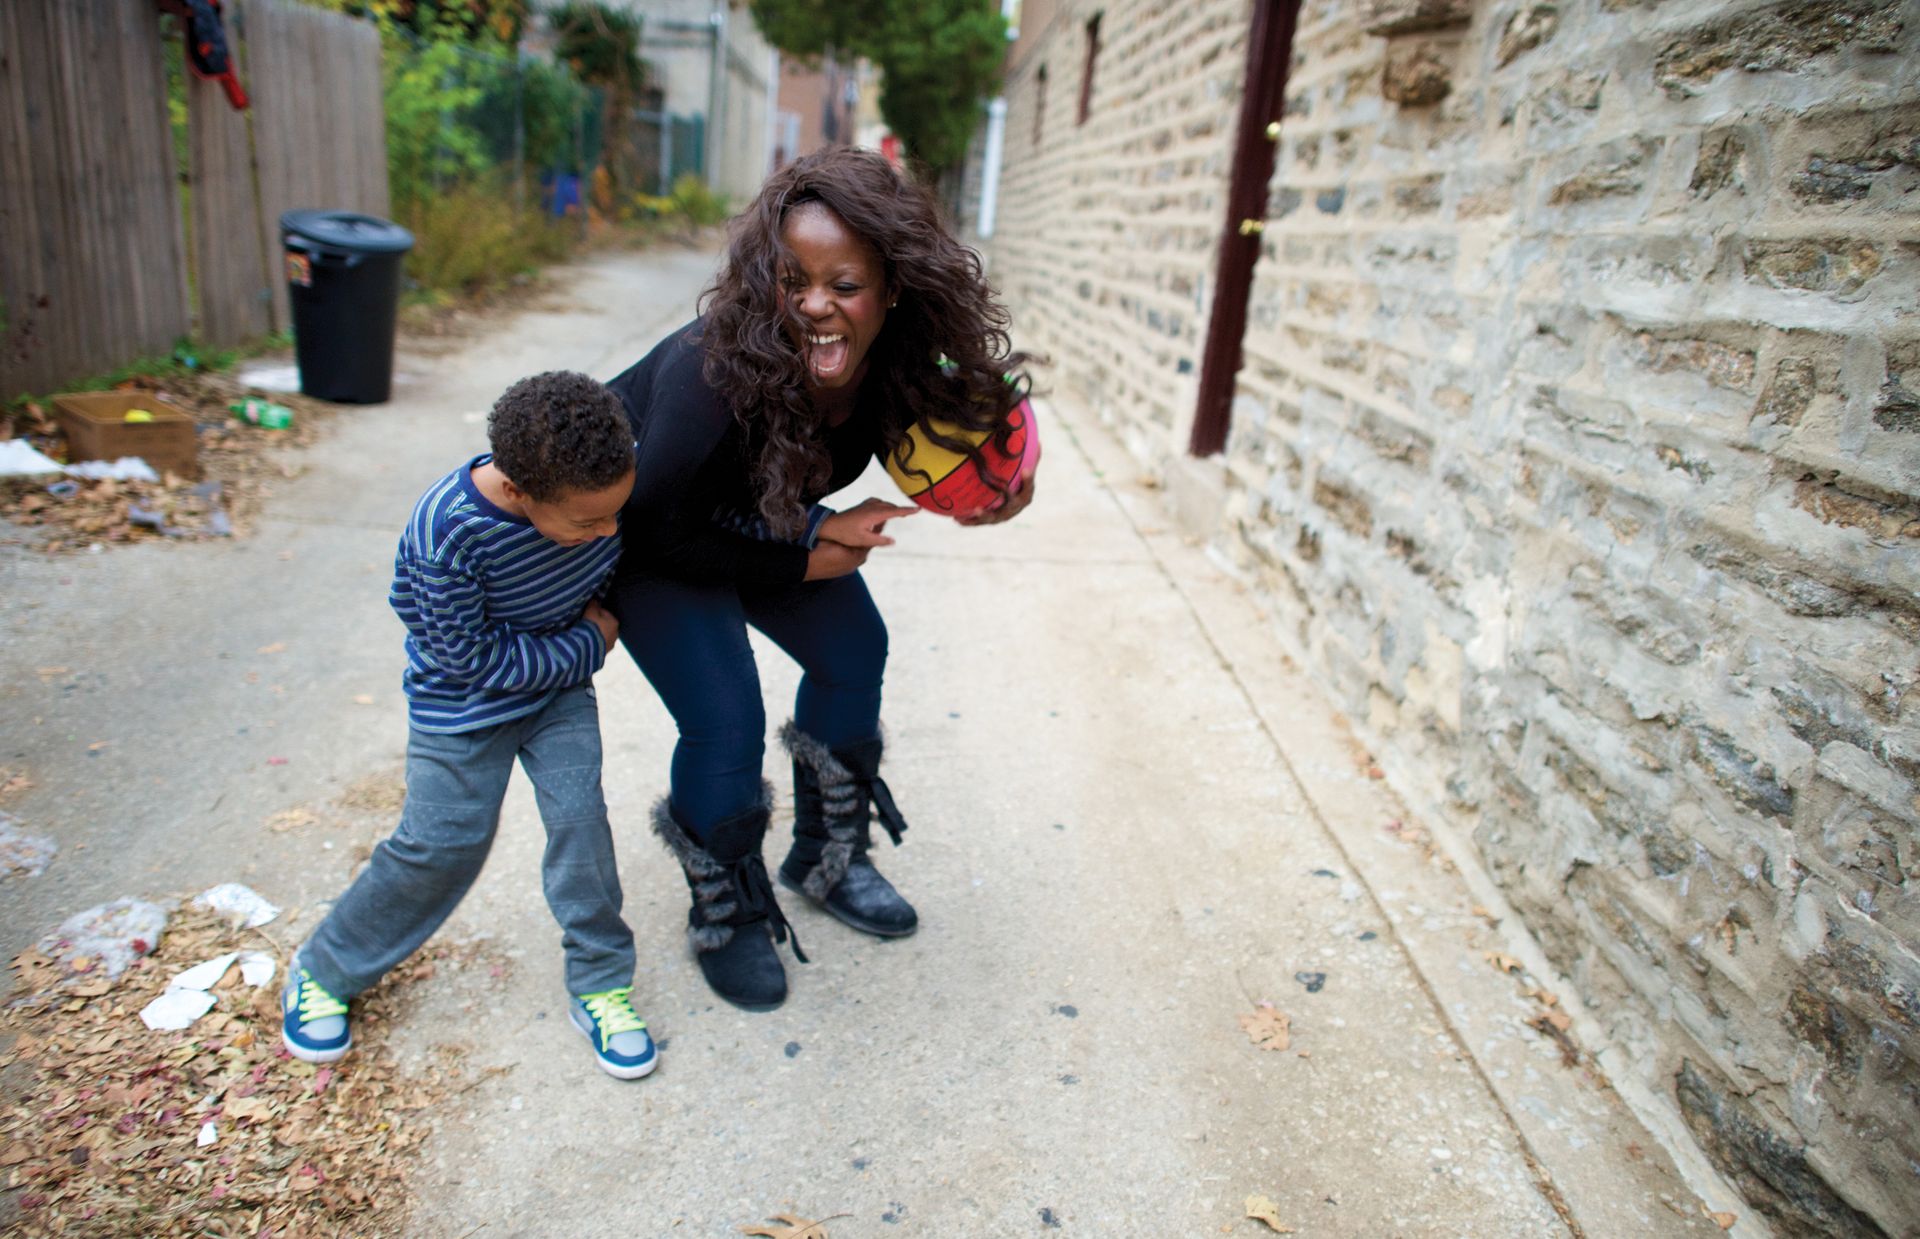 Enoch takes a break from his homework to play basketball with his mother outside their home in Philadelphia.